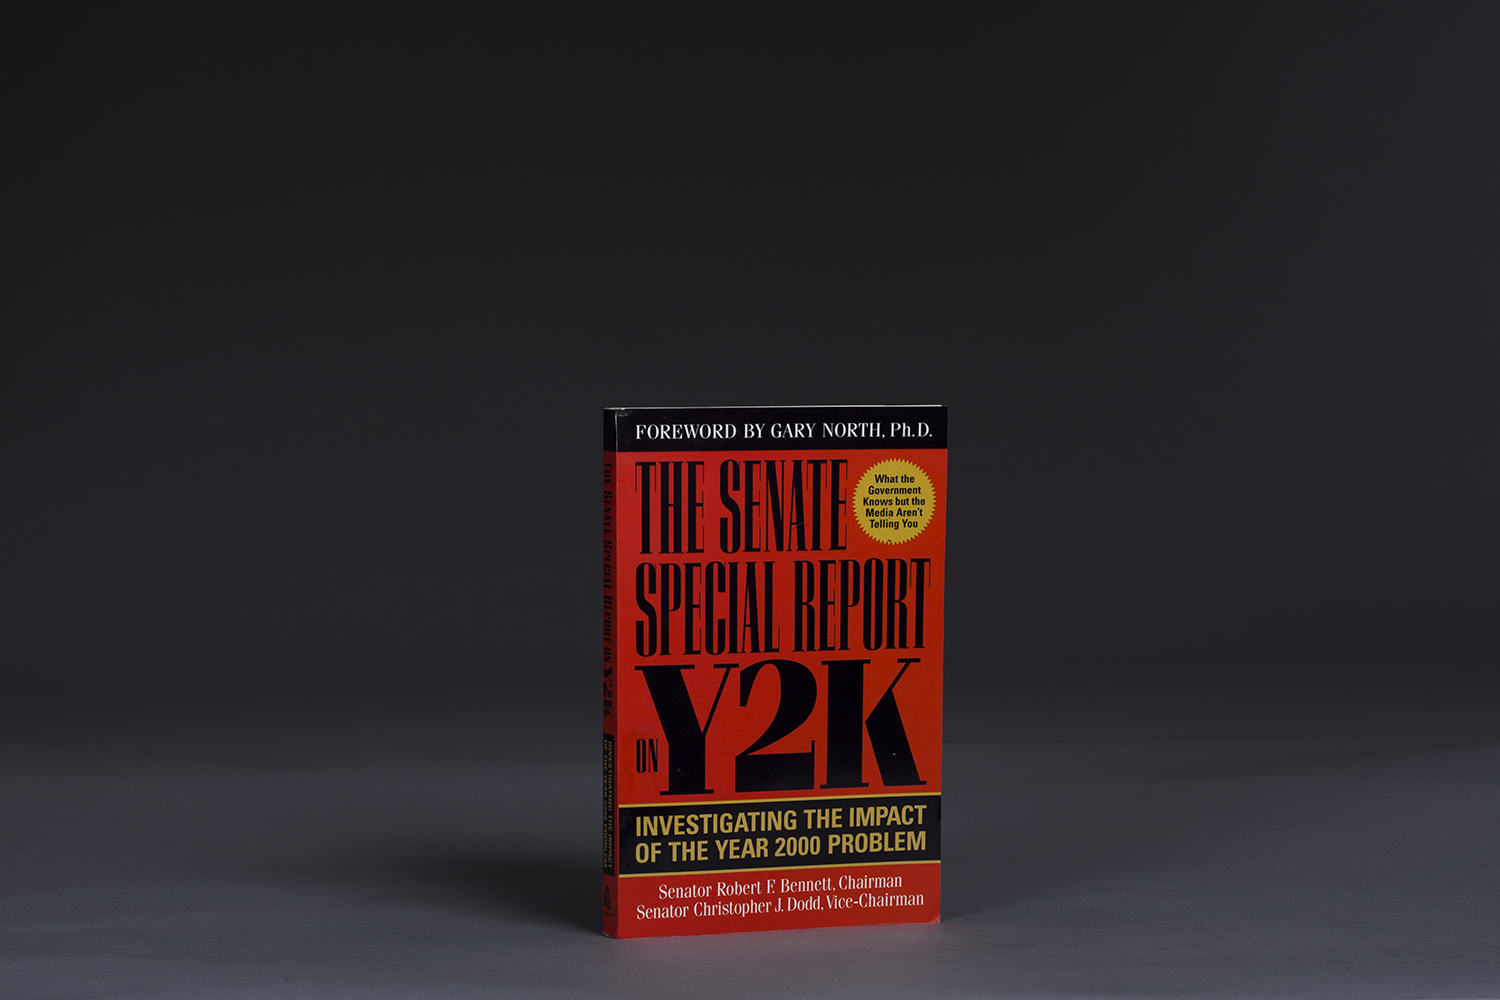 The Senate Special Report on Y2K - 0591 Cover.jpg